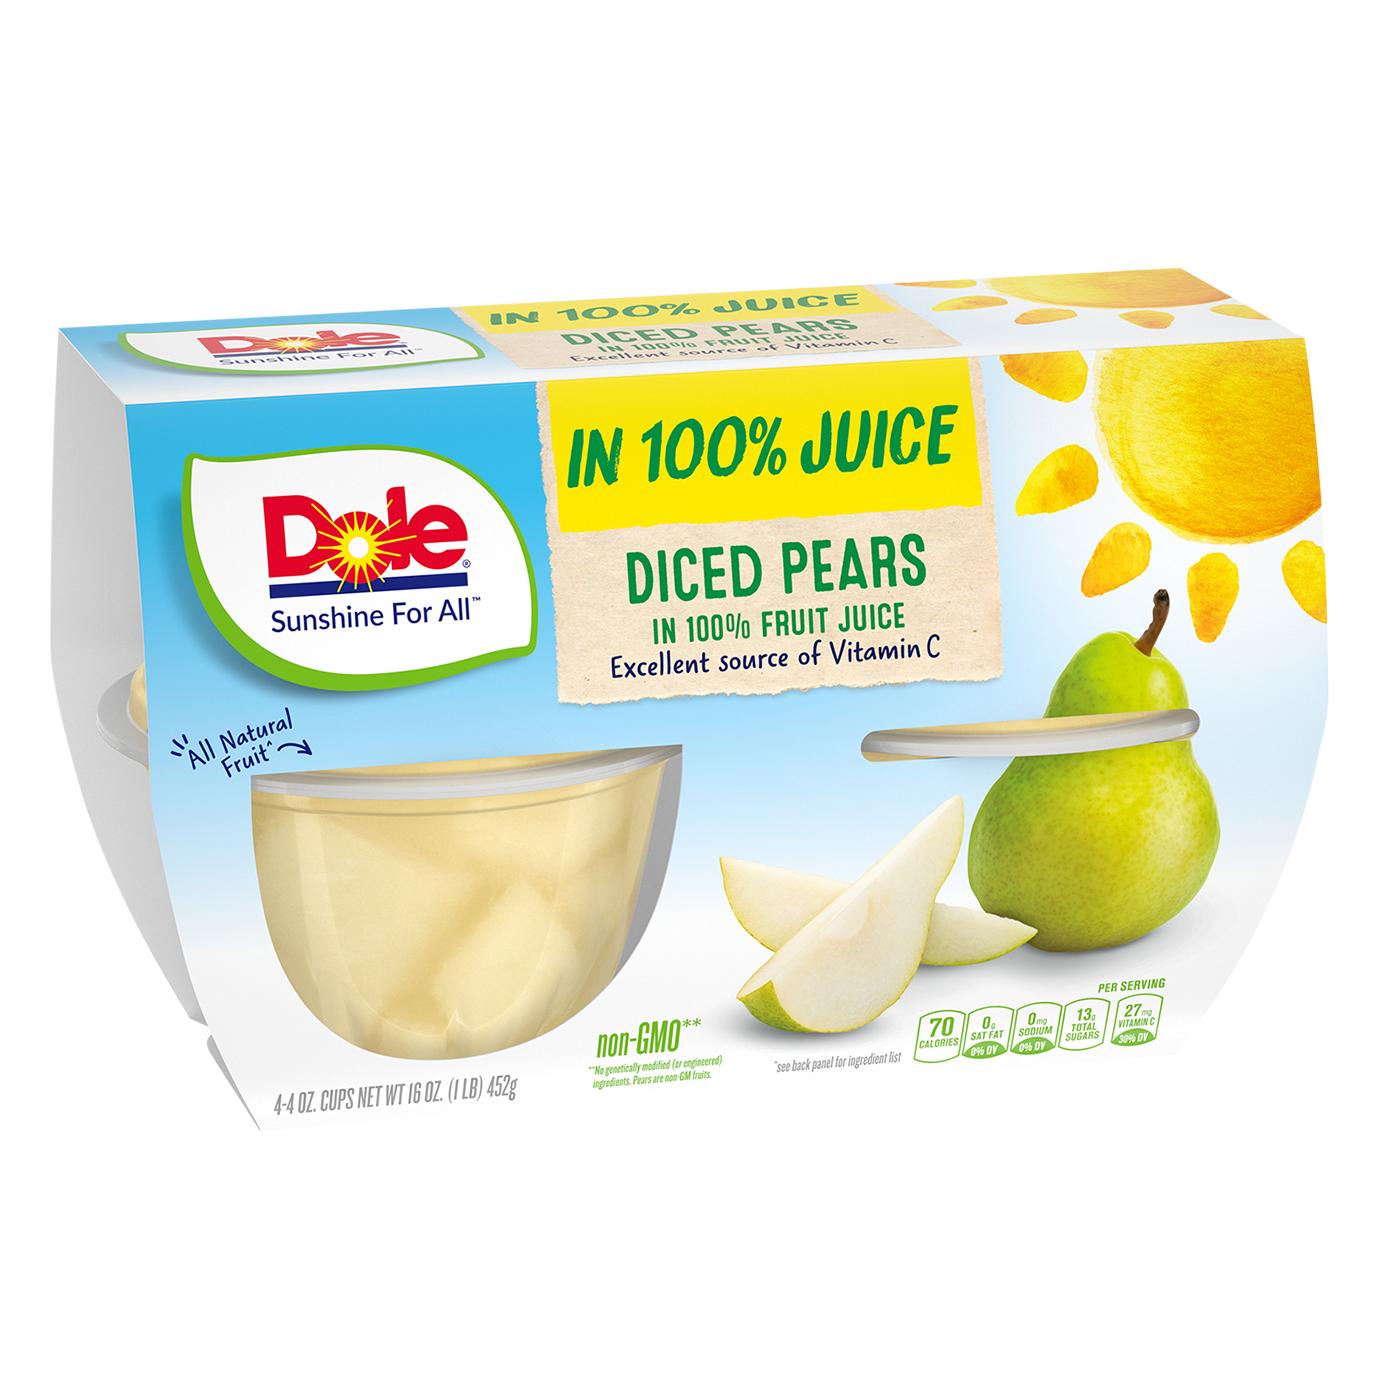 Dole Fruit Bowls - Diced Pears in 100% Juice; image 2 of 7